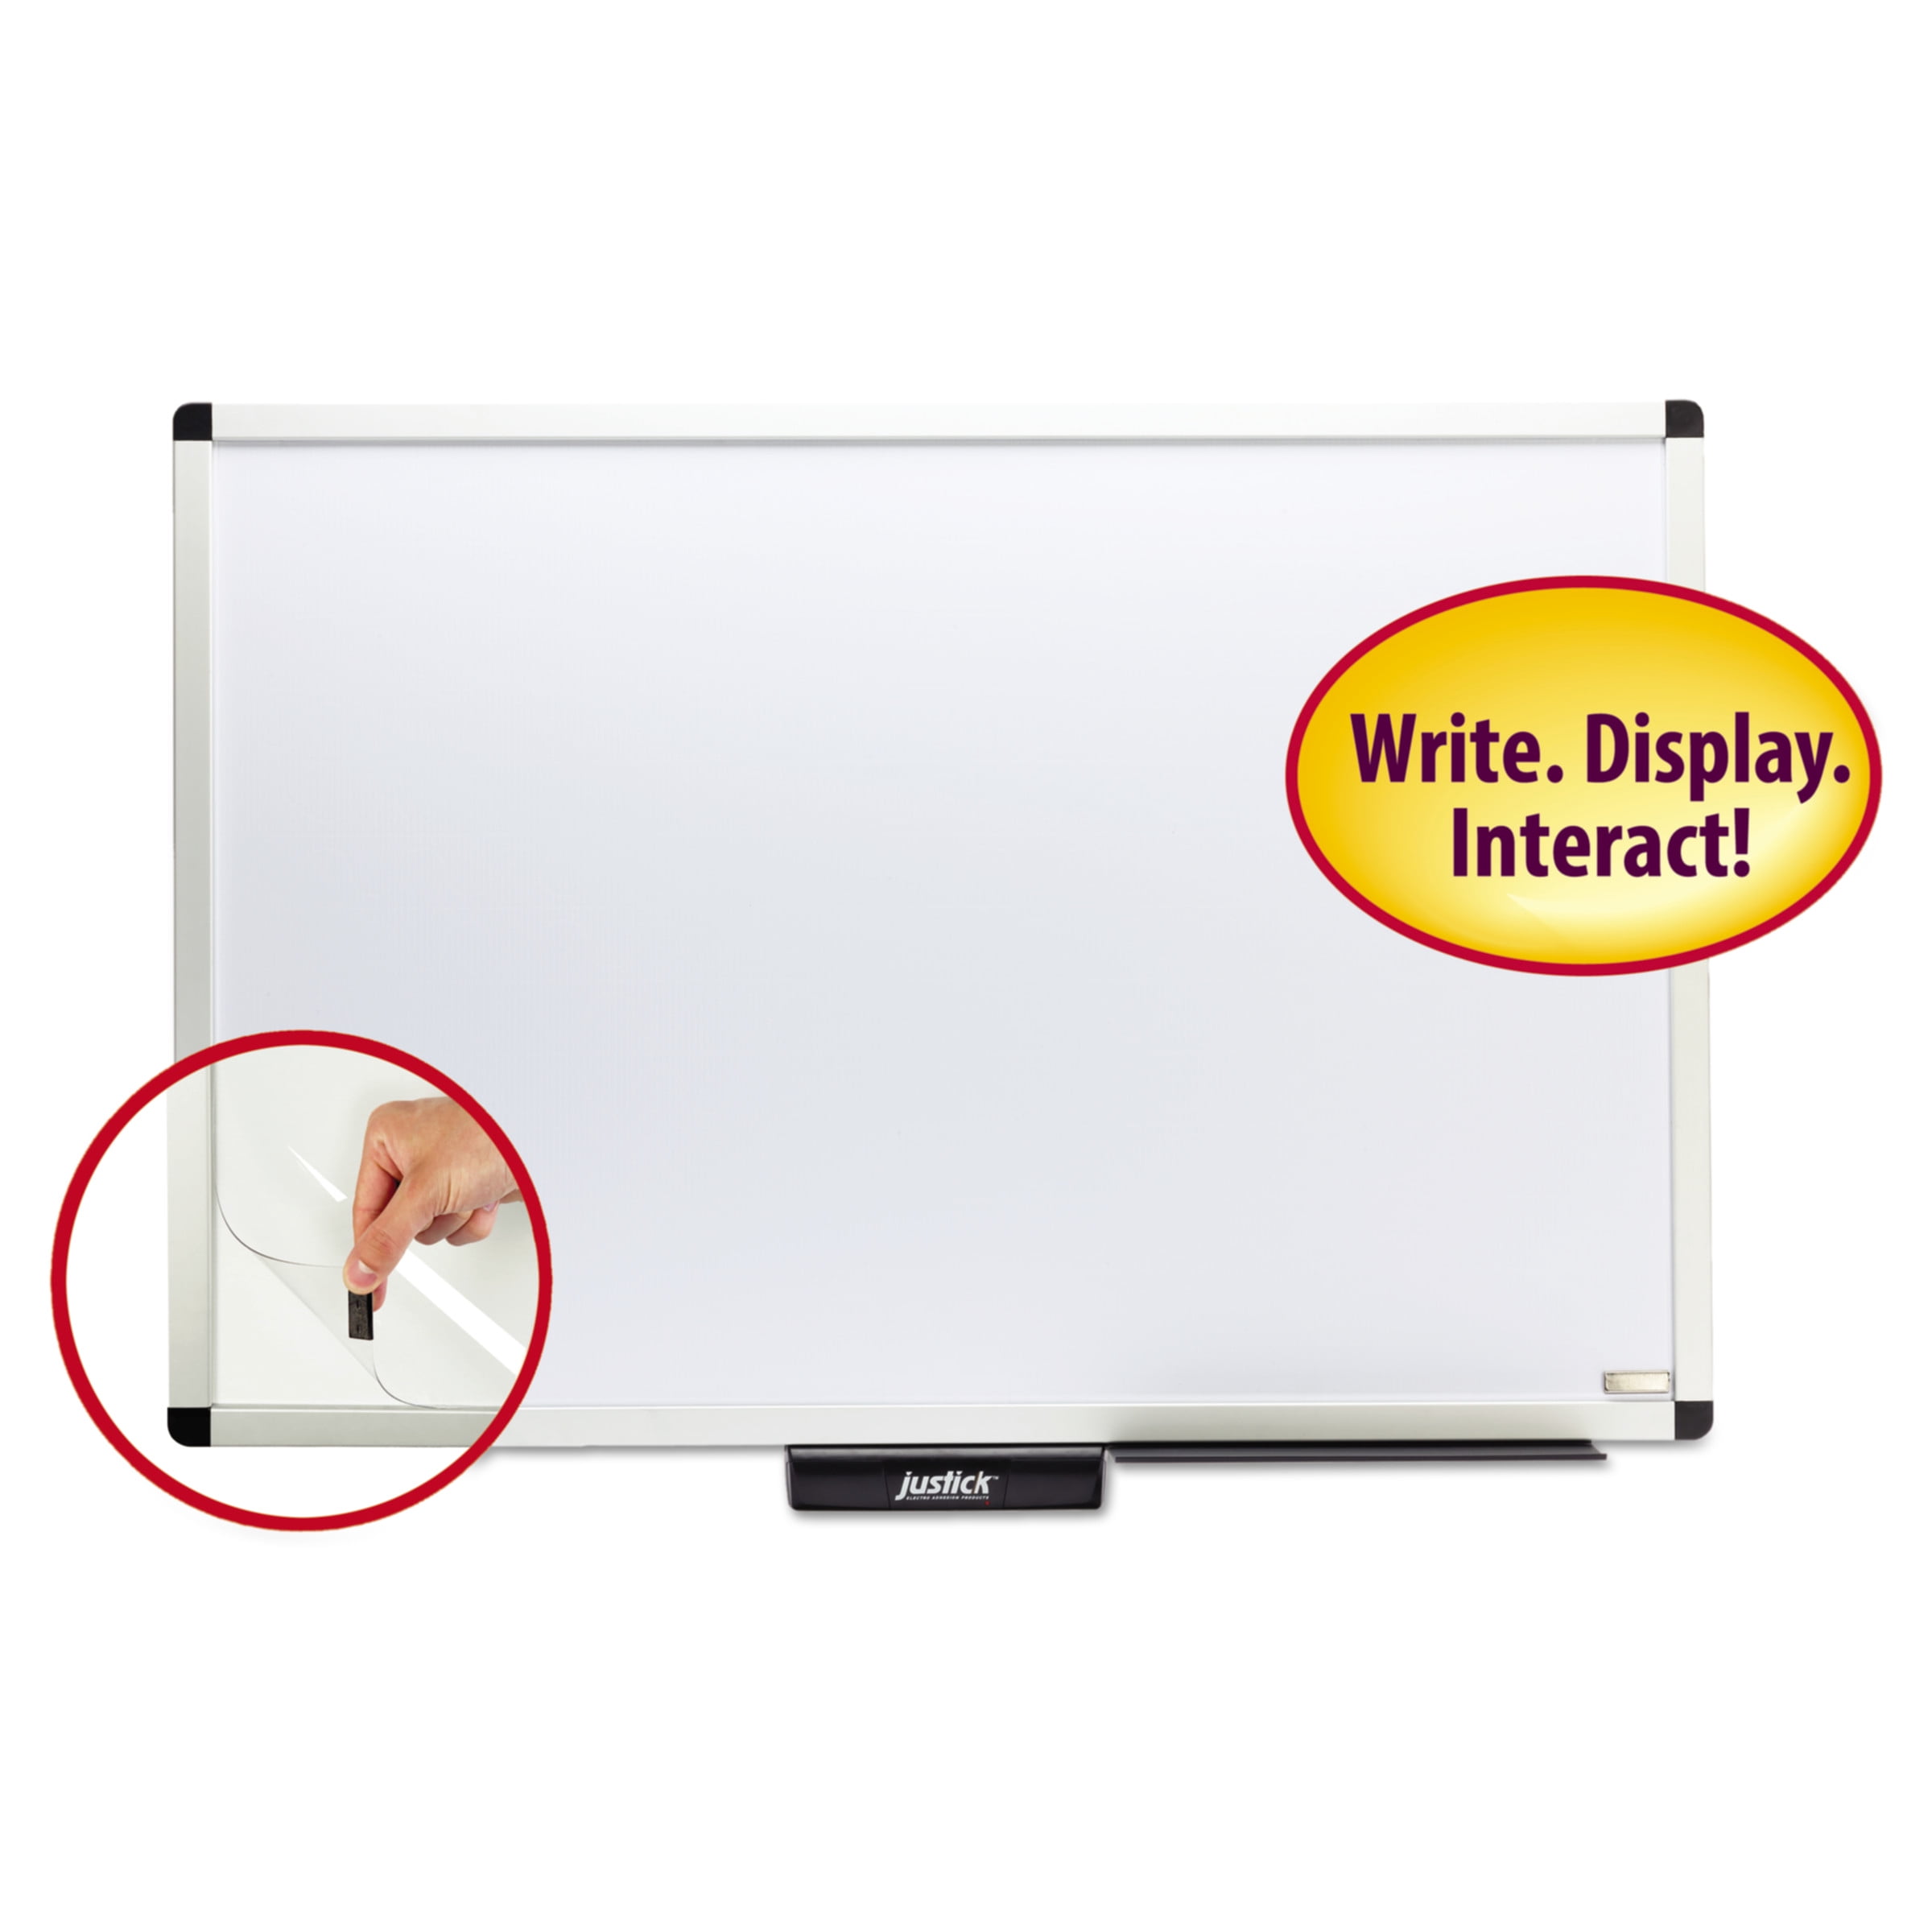 48W x 36H with Electro Surface Technology 02570 Premium Aluminum Frame Electro Dry-Erase Board with clear overlay Black Justick by Smead 